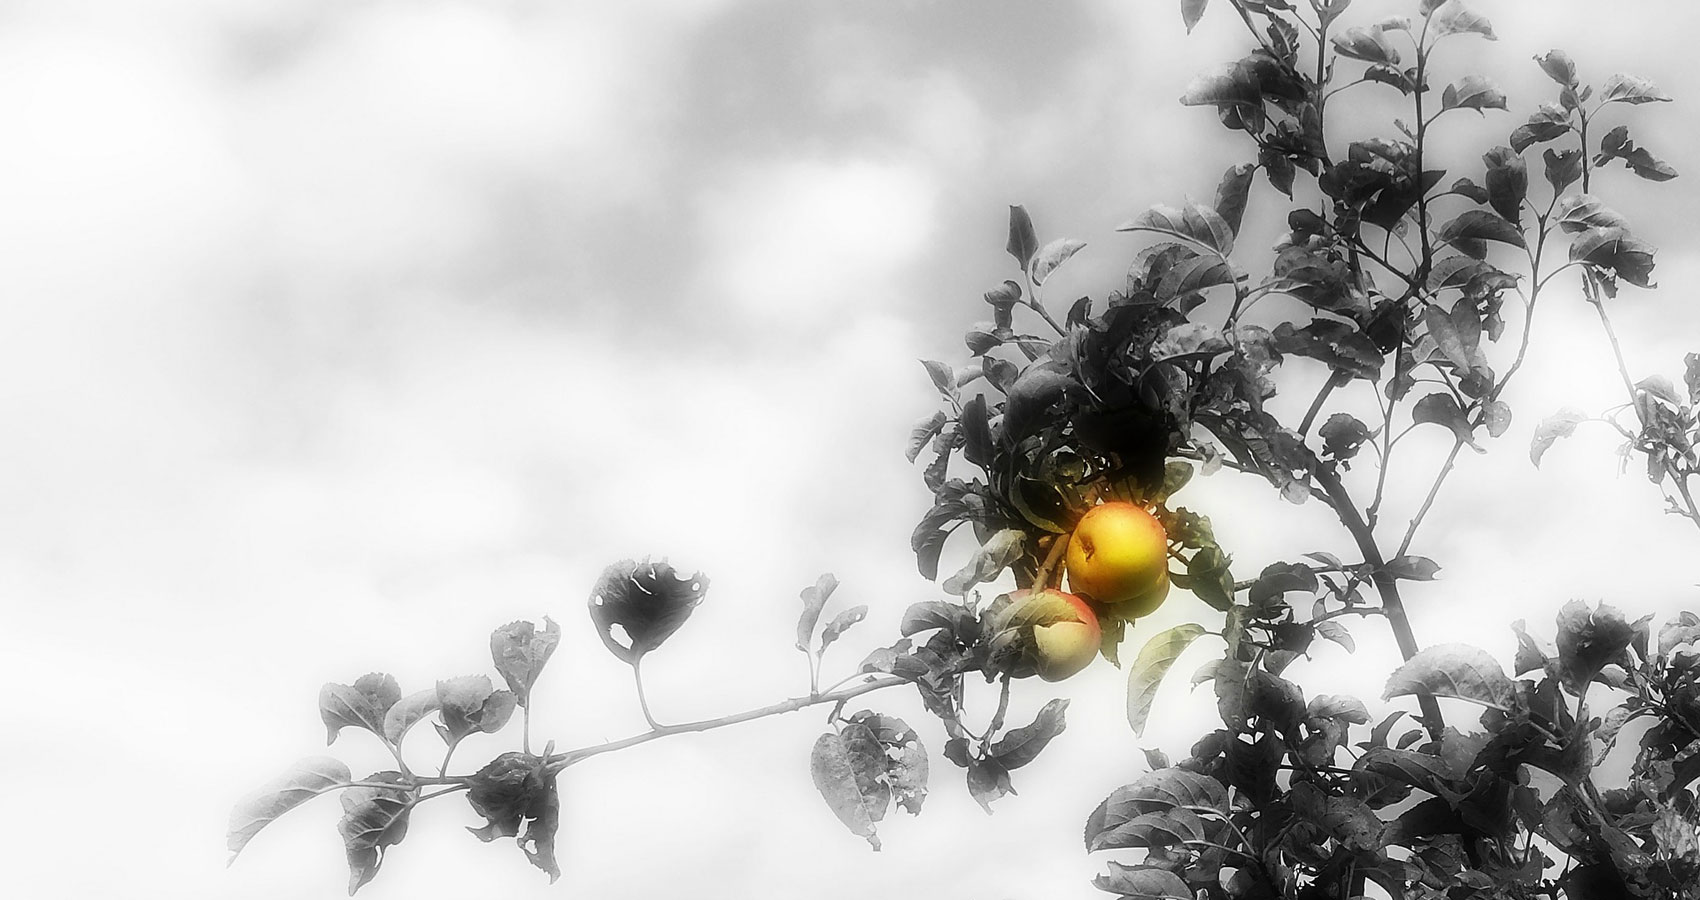 An Apple Orchard, a poem written by Janina Osewska at Spillwords.com